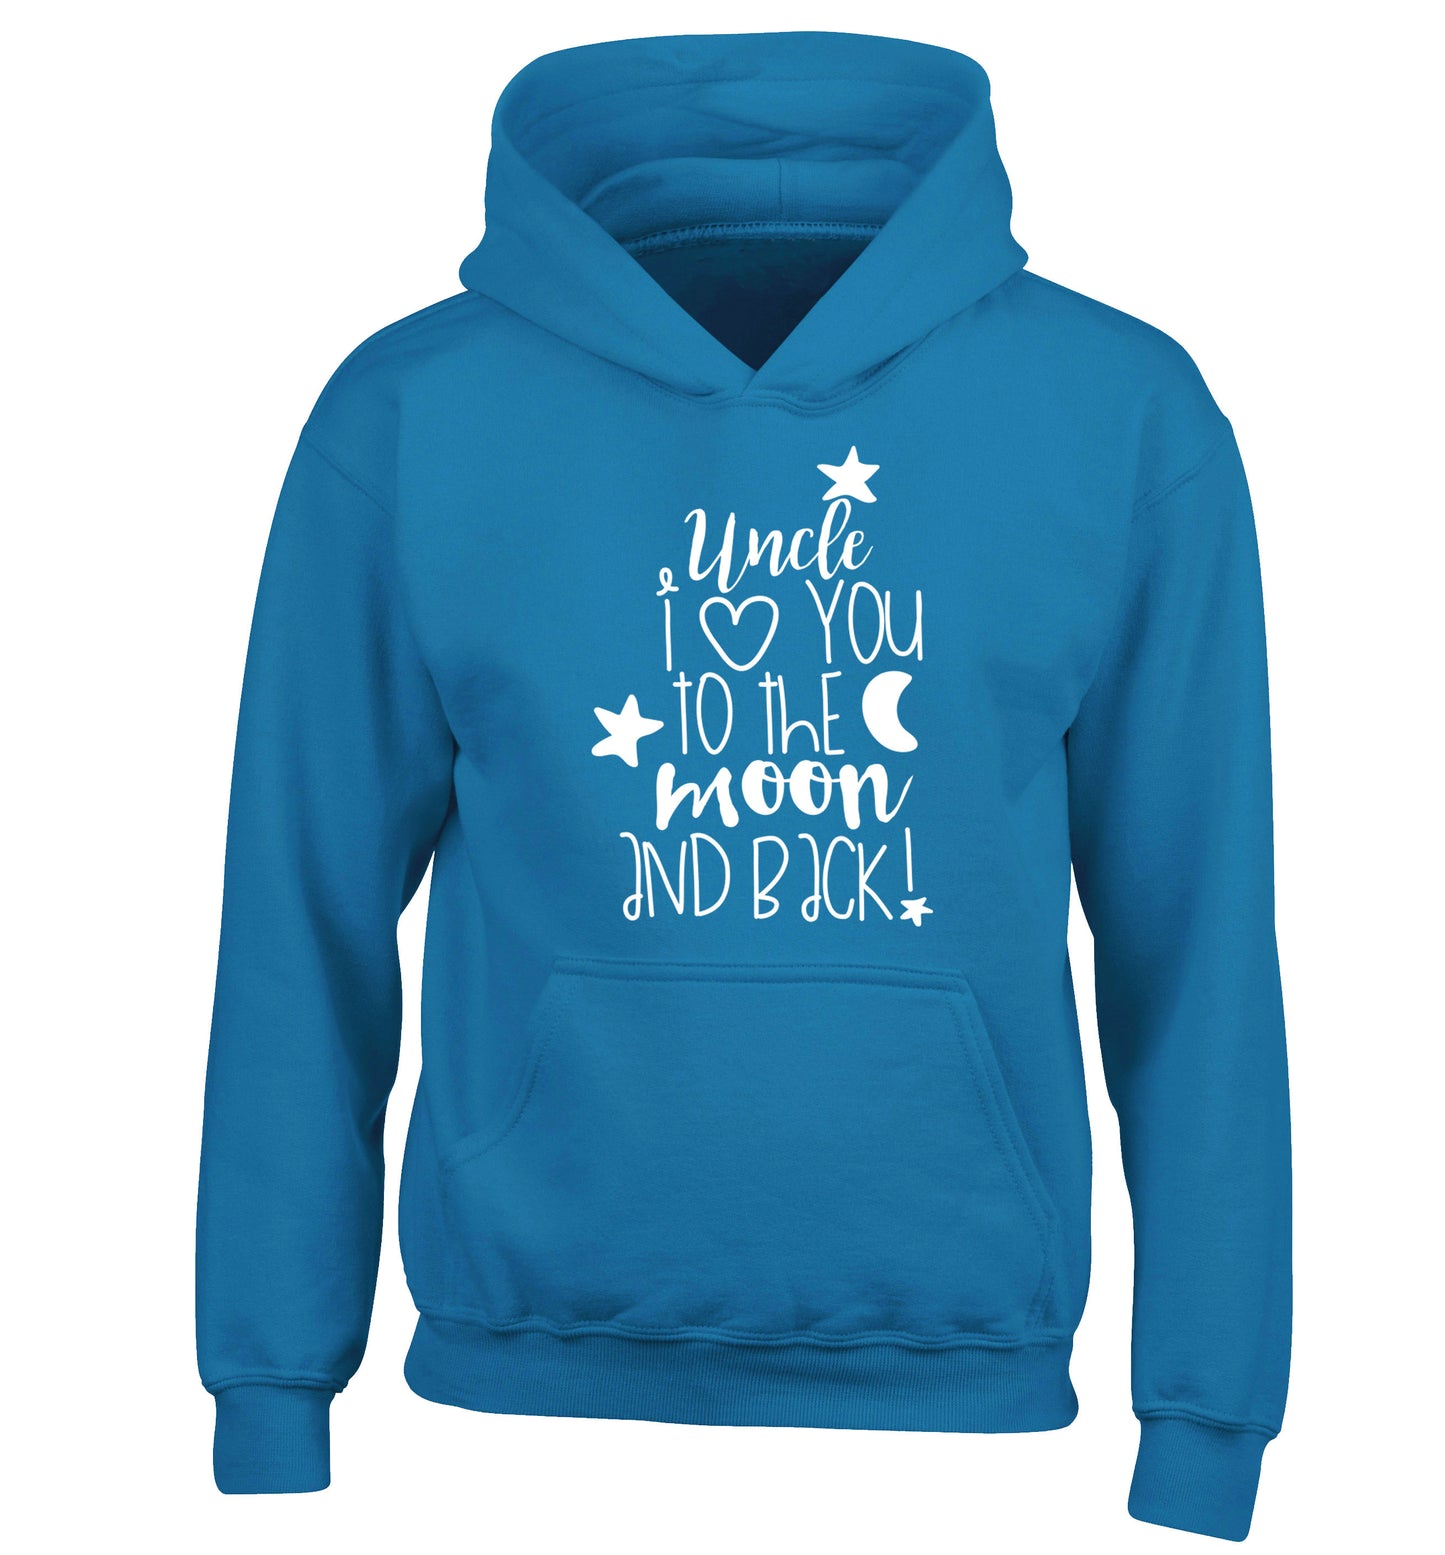 Uncle I love you to the moon and back children's blue hoodie 12-14 Years